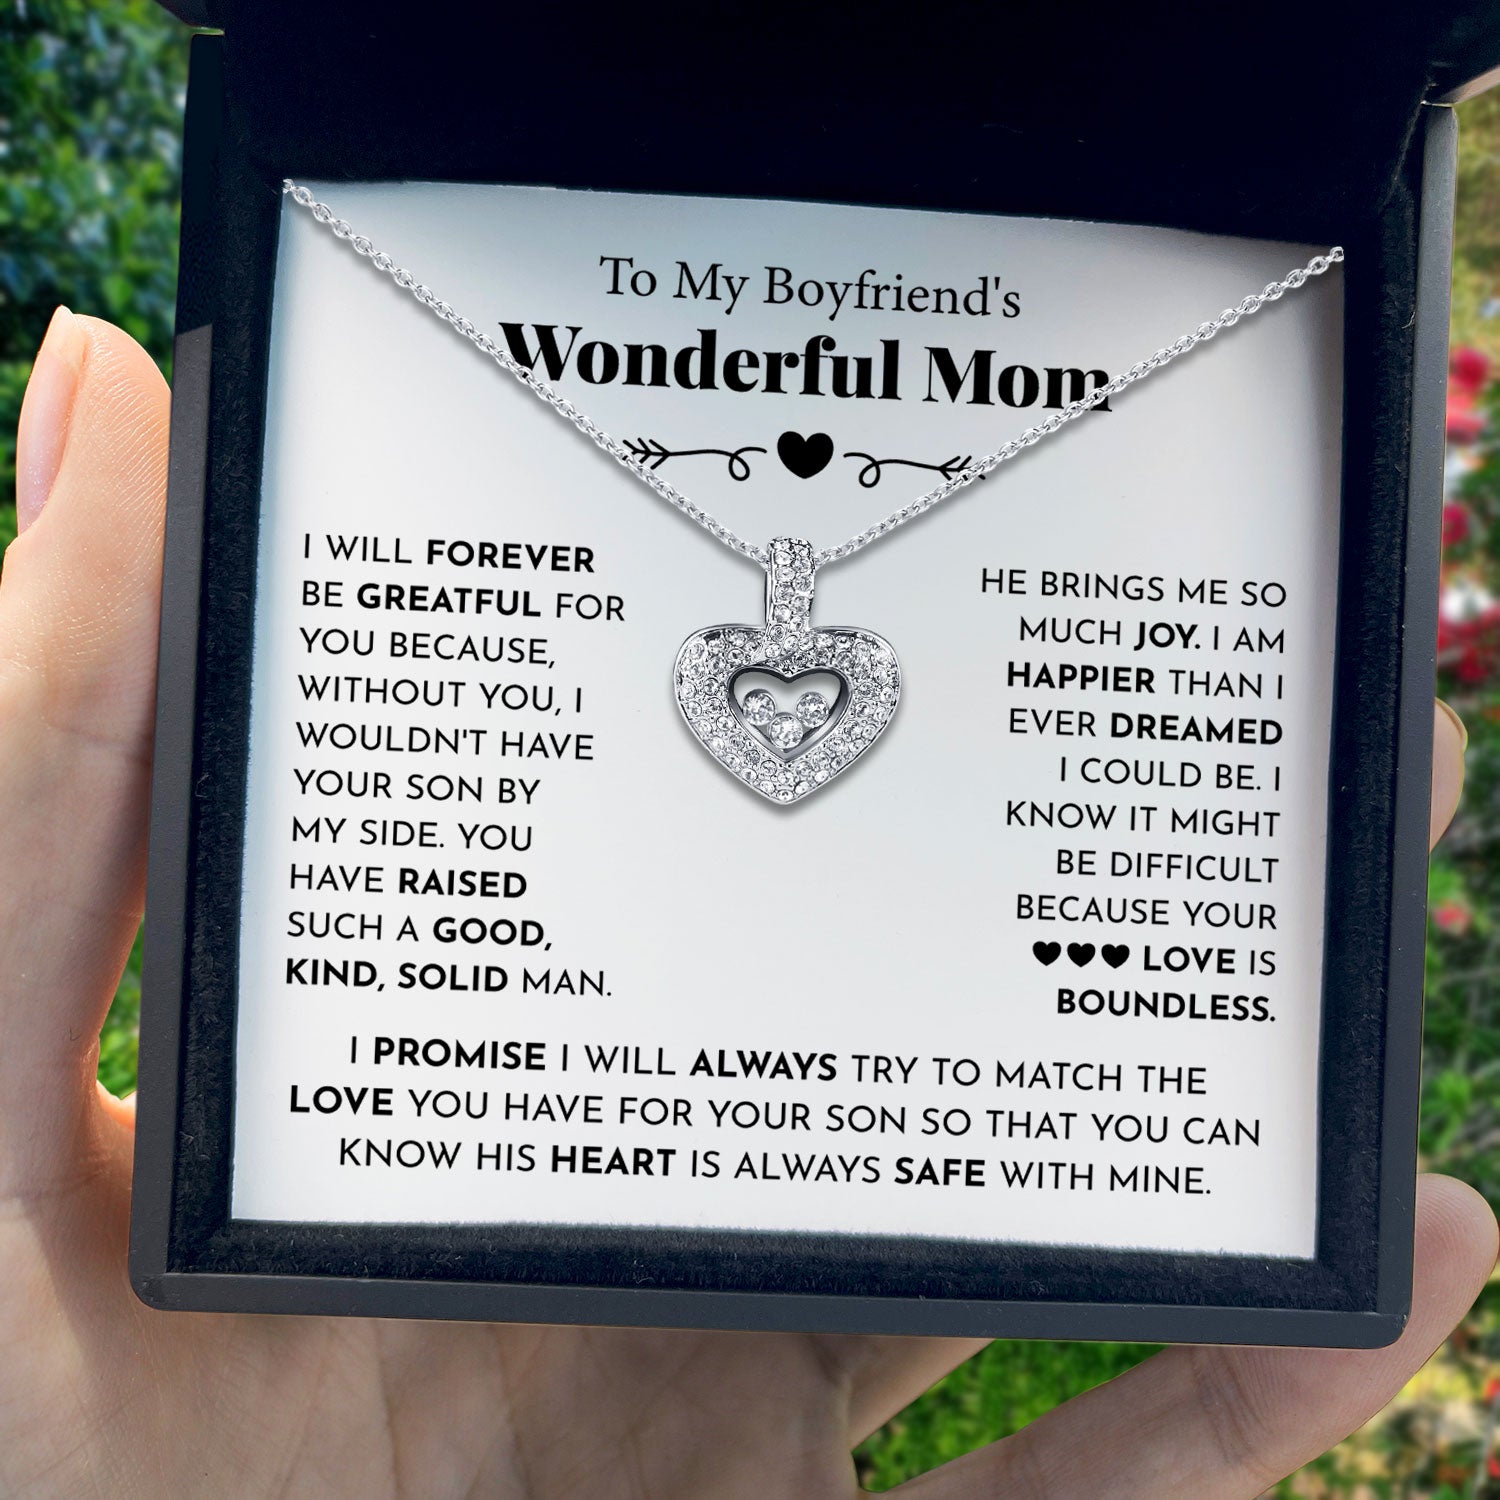 To My Boyfriend's Wonderful Mom - You Have Raised Such a Good, Kind, Solid Man - Tryndi Floating Heart Necklace